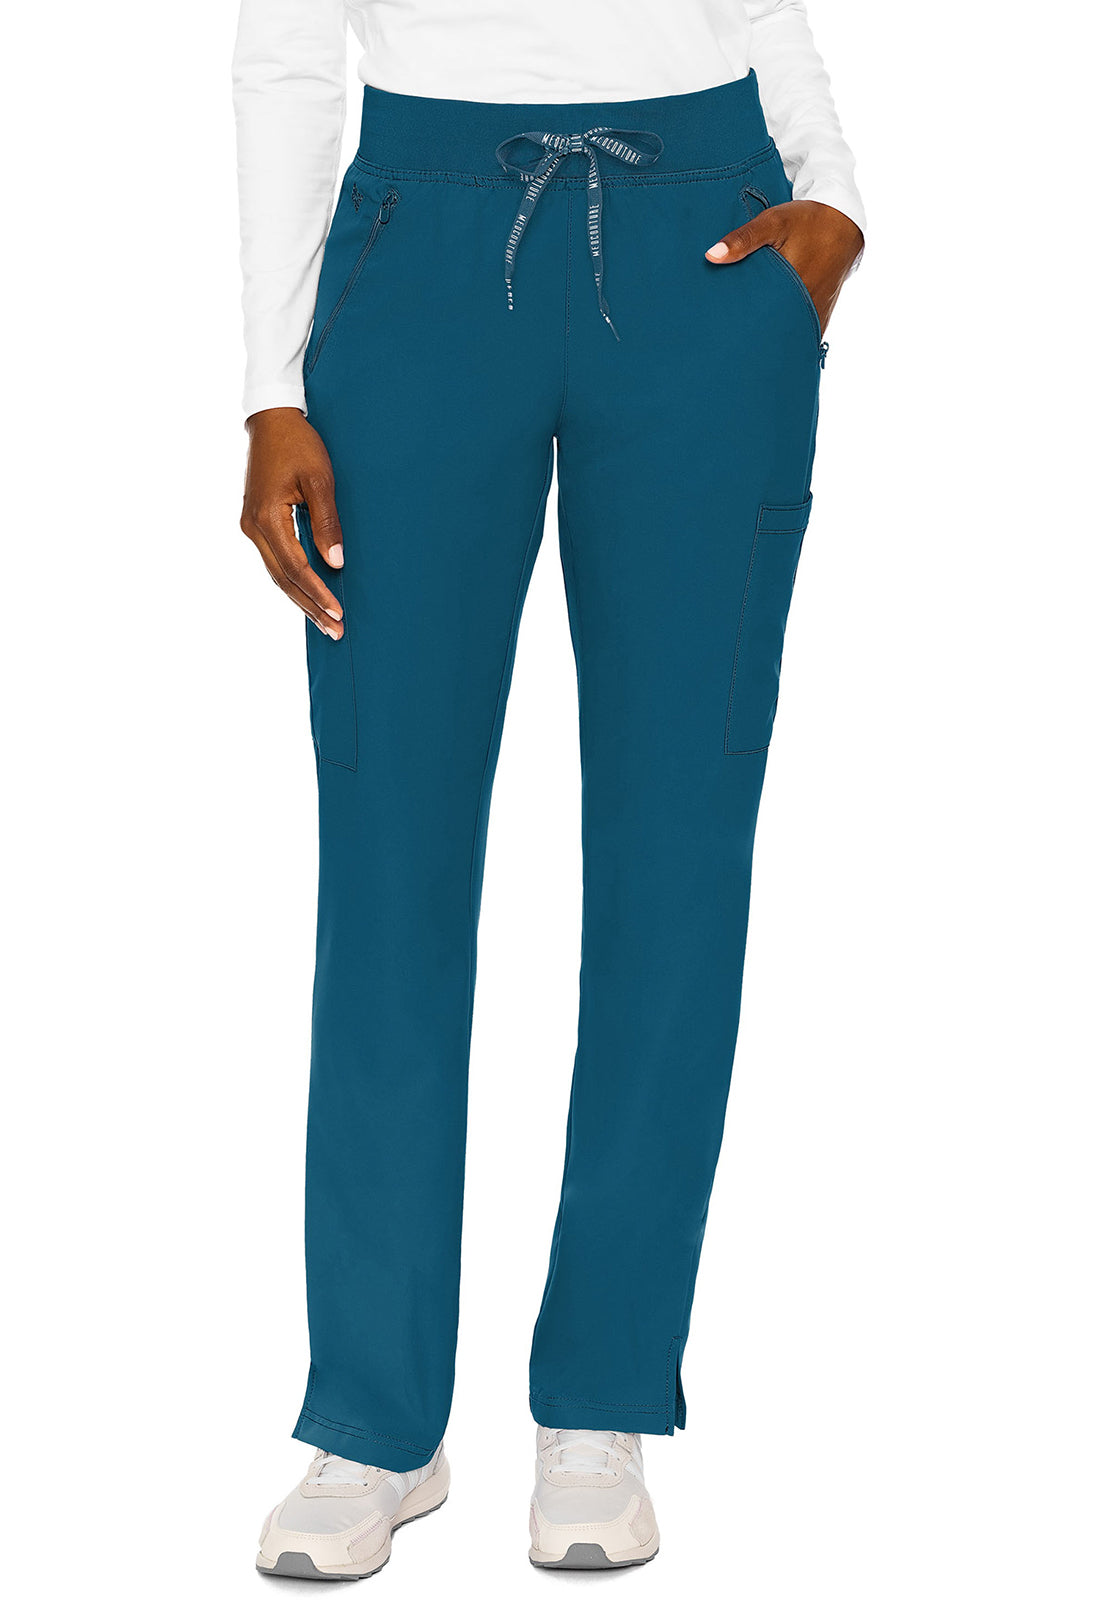 MC2702 - Med Couture Insight Straight Leg Pant